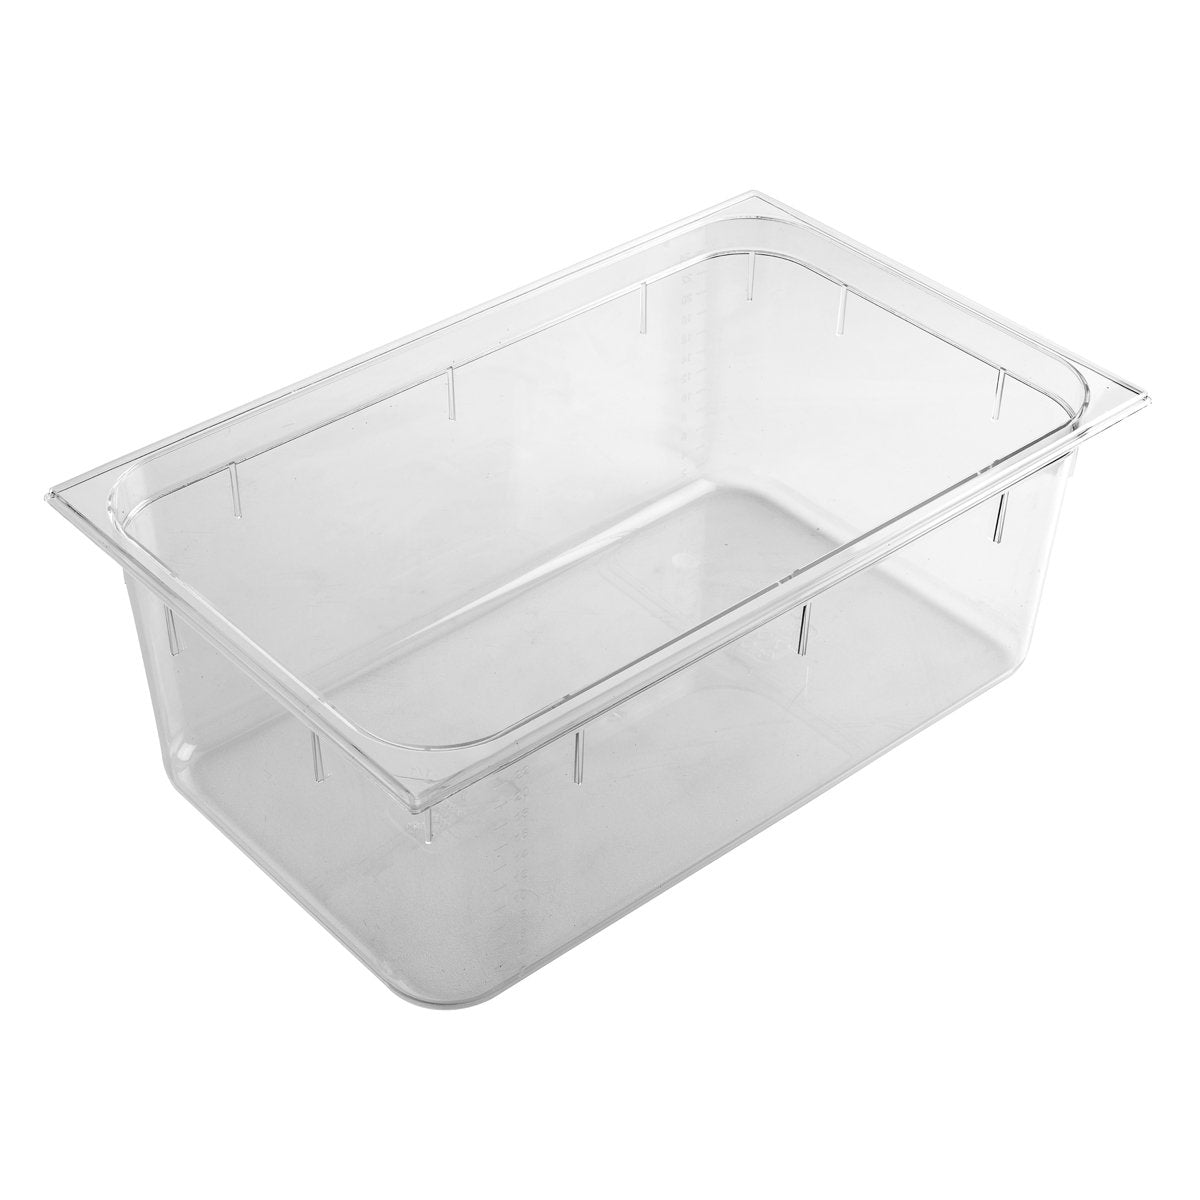 PC-11200CL Inox Macel Gastronorm Pan Polycarbonate Clear 1/1 Size 200mm Tomkin Australia Hospitality Supplies